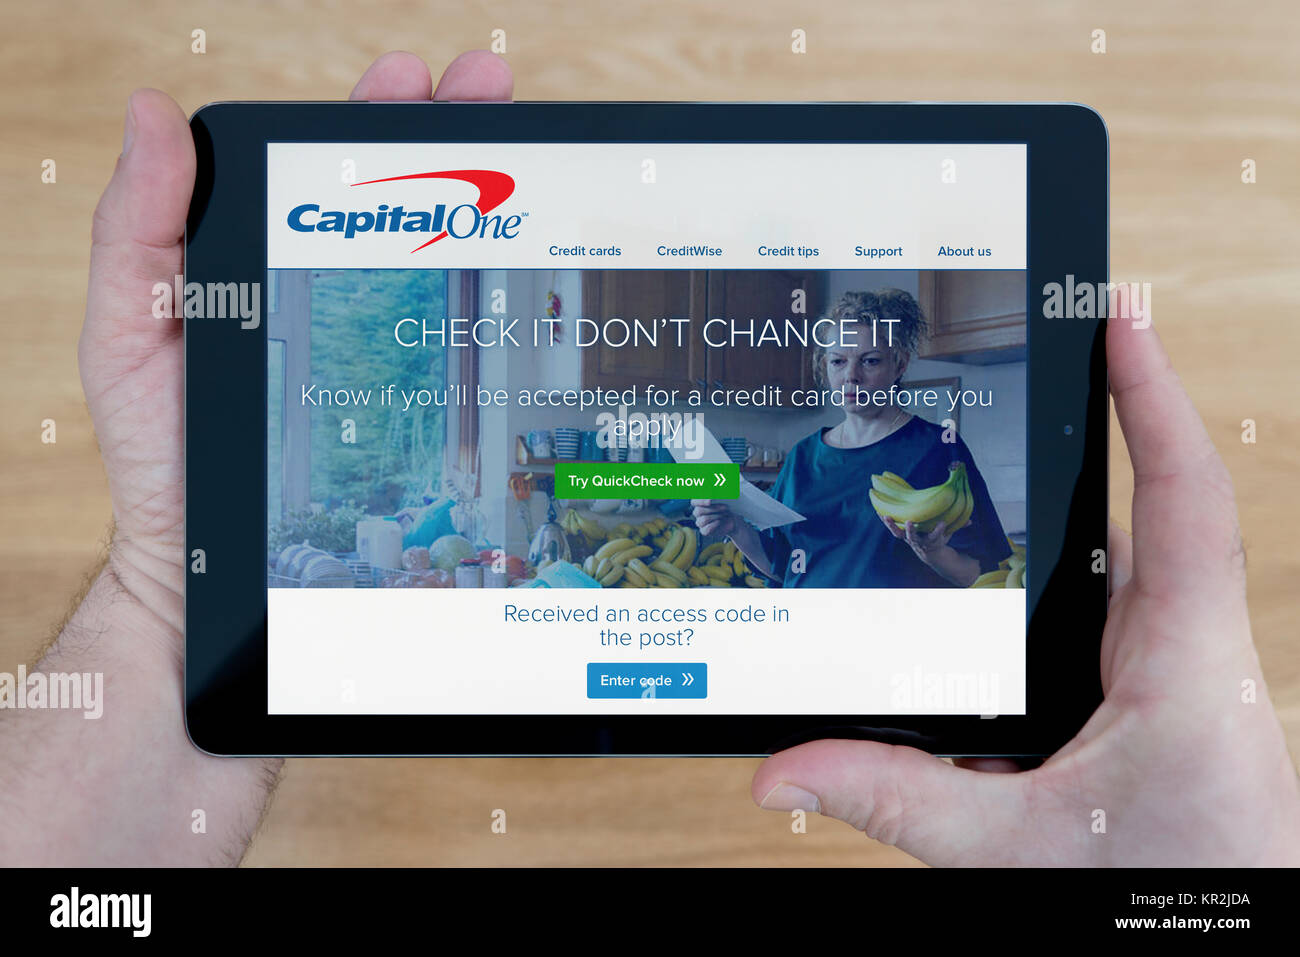 A man looks at the Capital One bank website on his iPad tablet device, shot against a wooden table top background (Editorial use only) Stock Photo